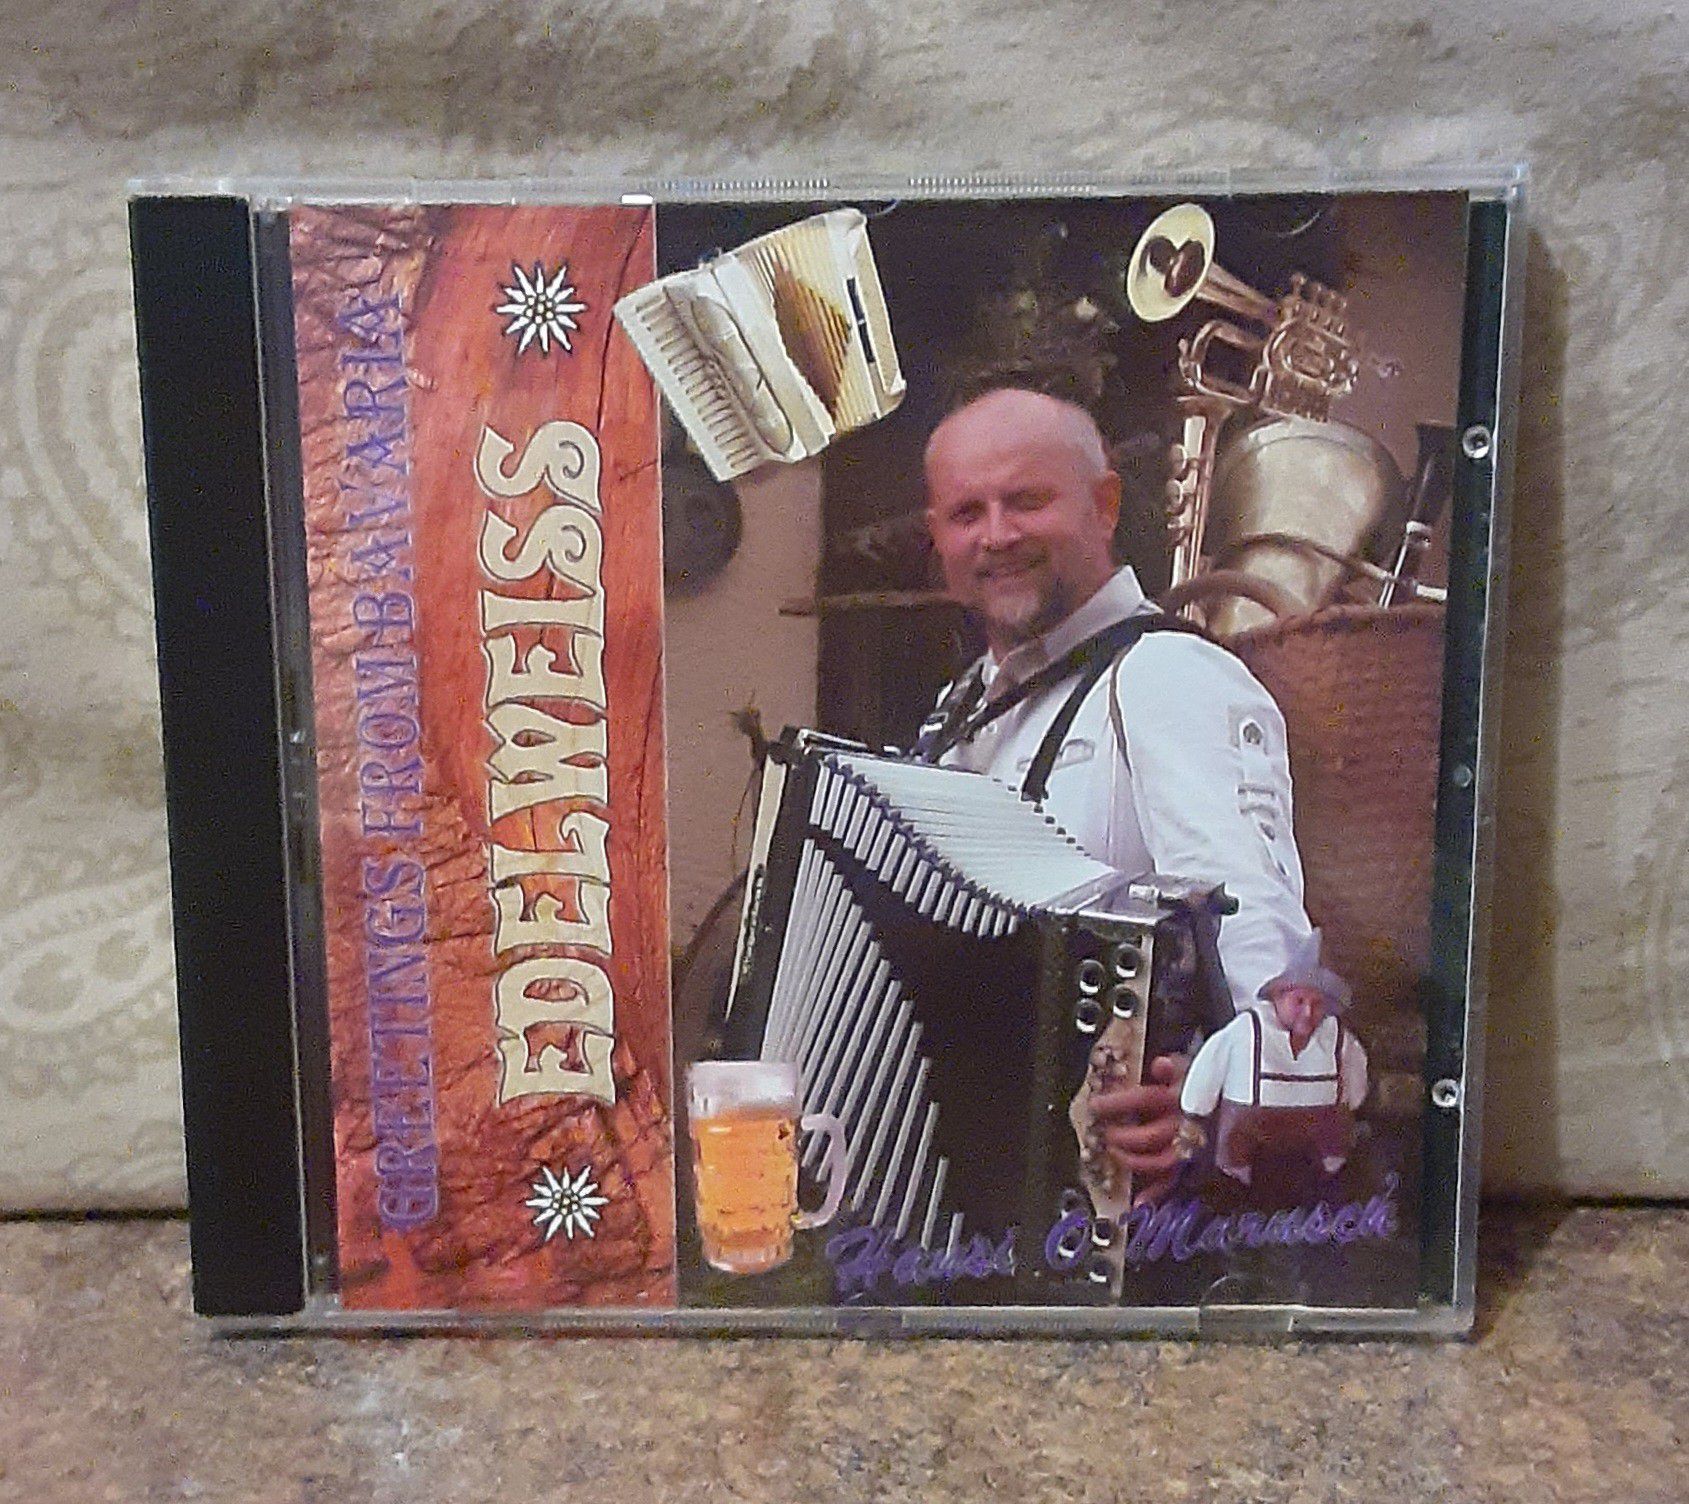 Greetings From Bavaria Edelweiss My World Of Music Compact Disc Music CD